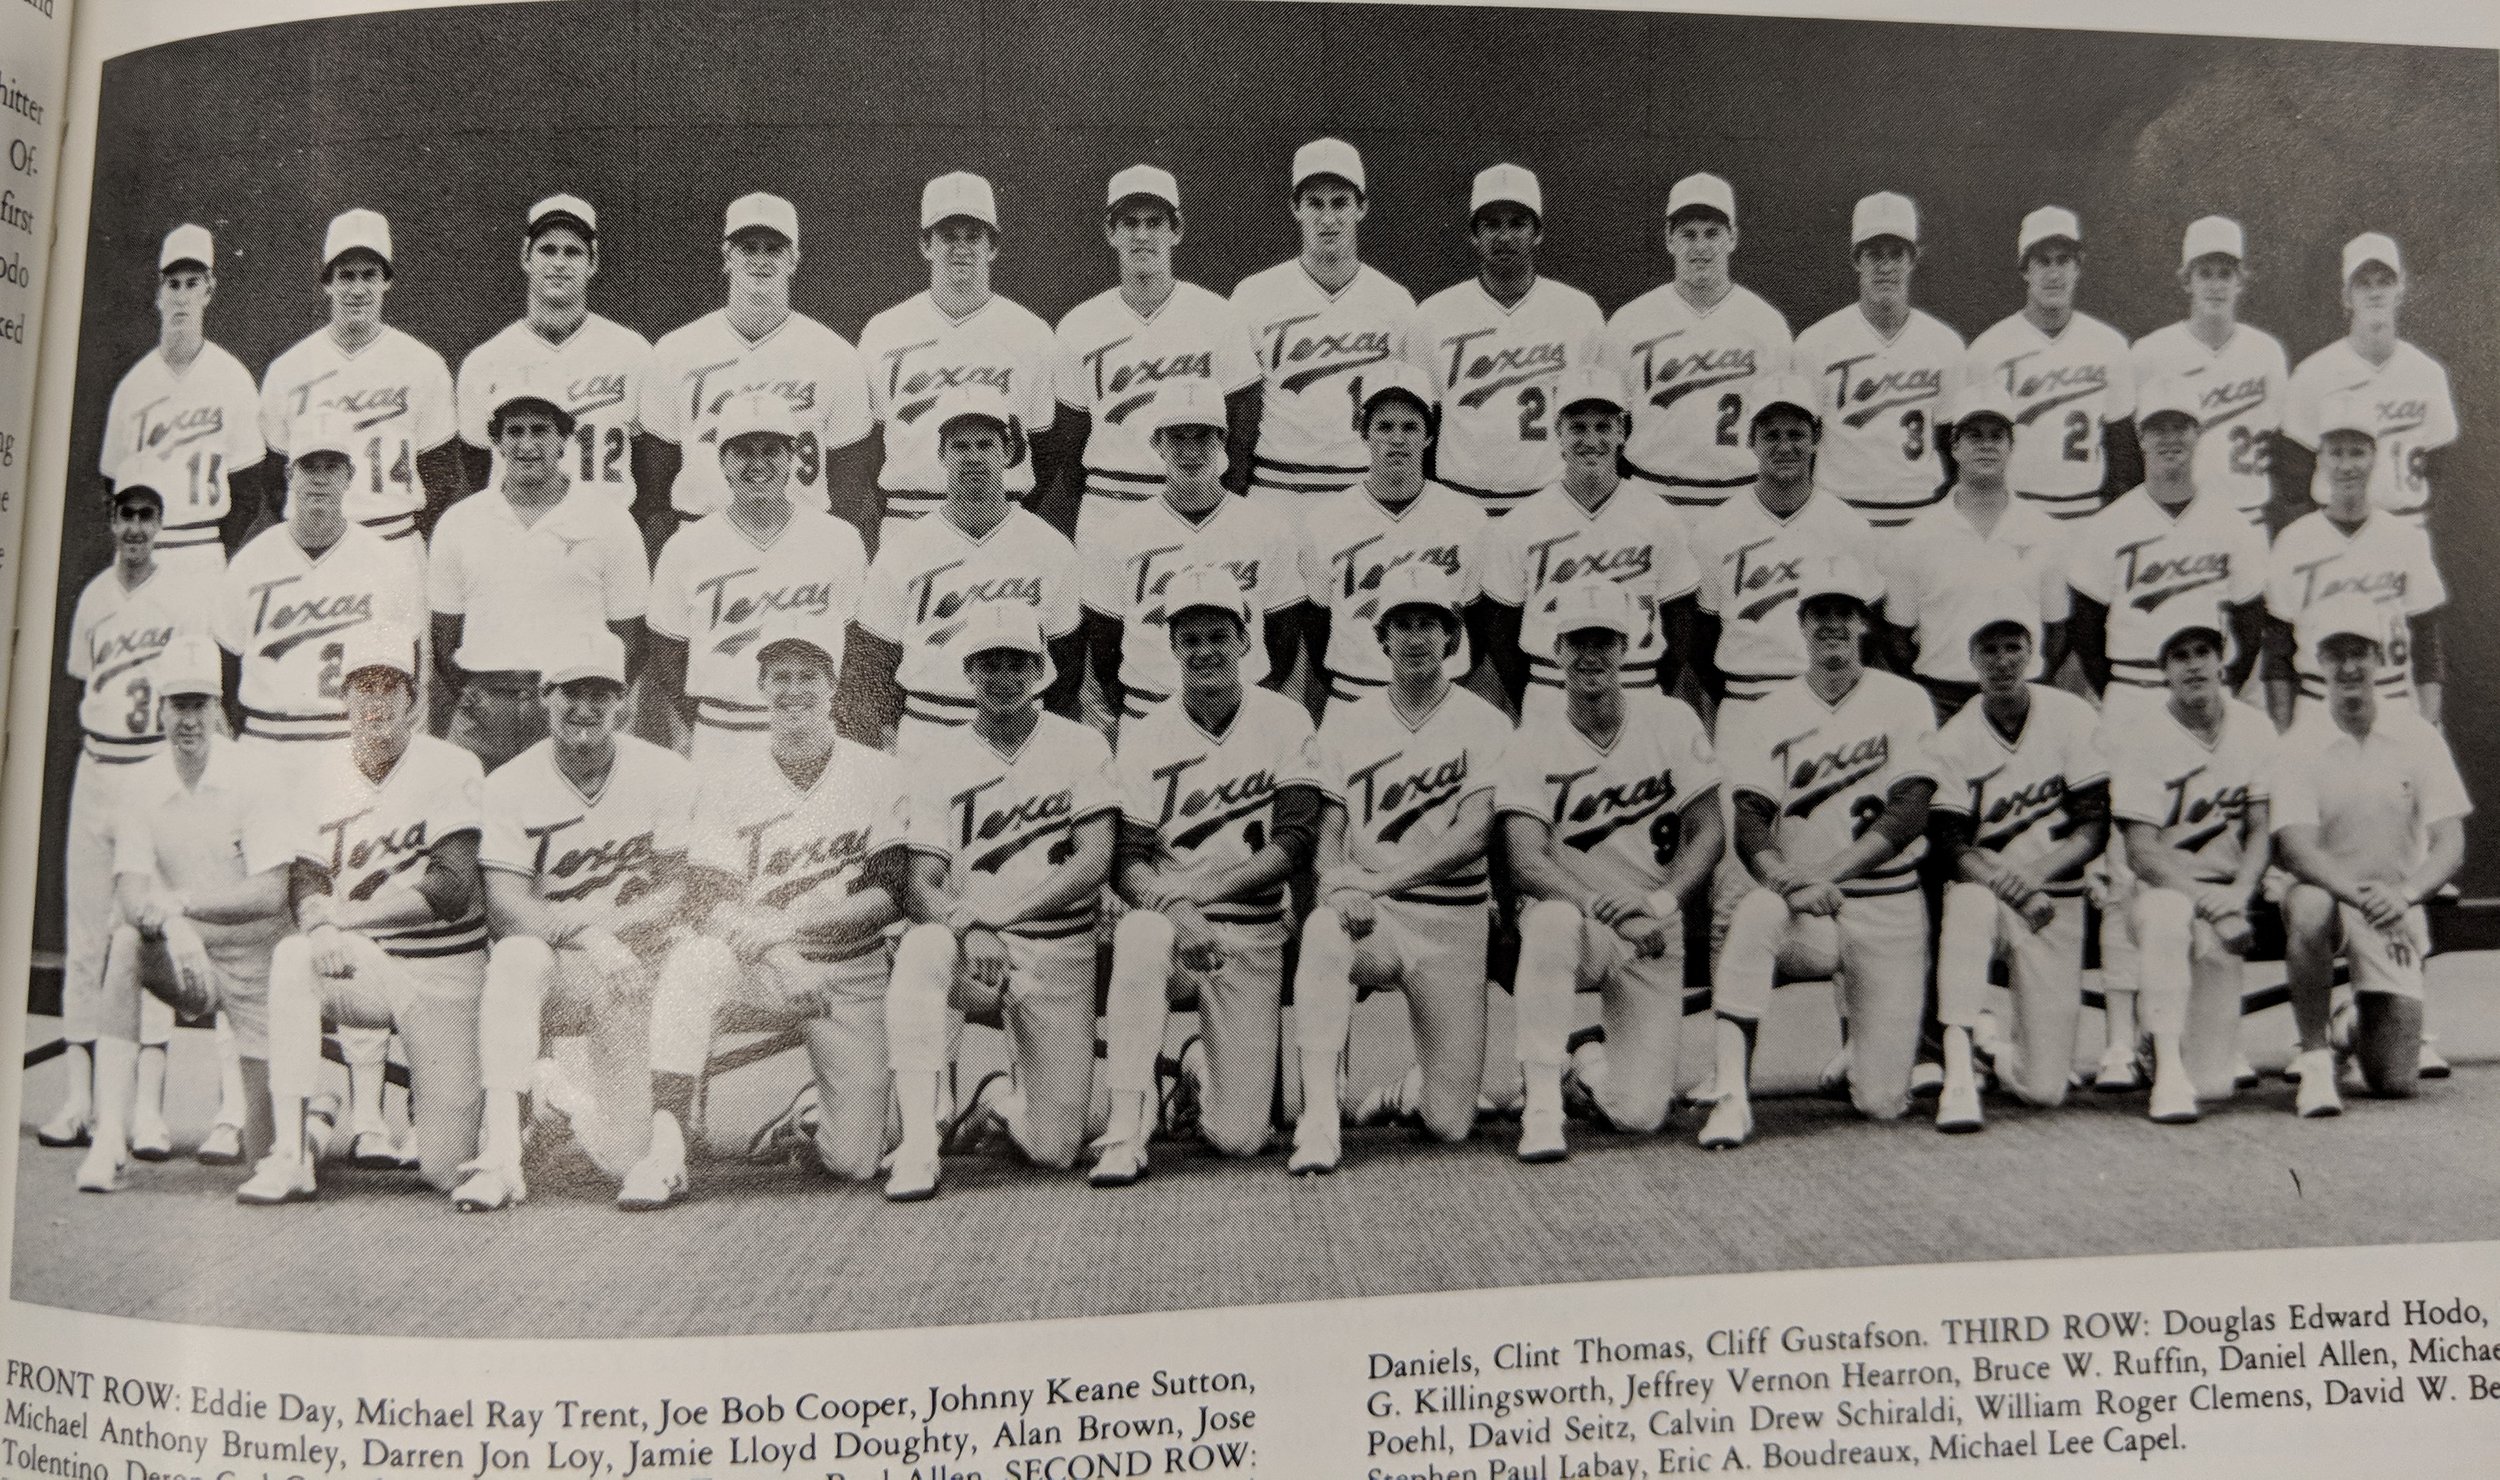 1983 National Champs